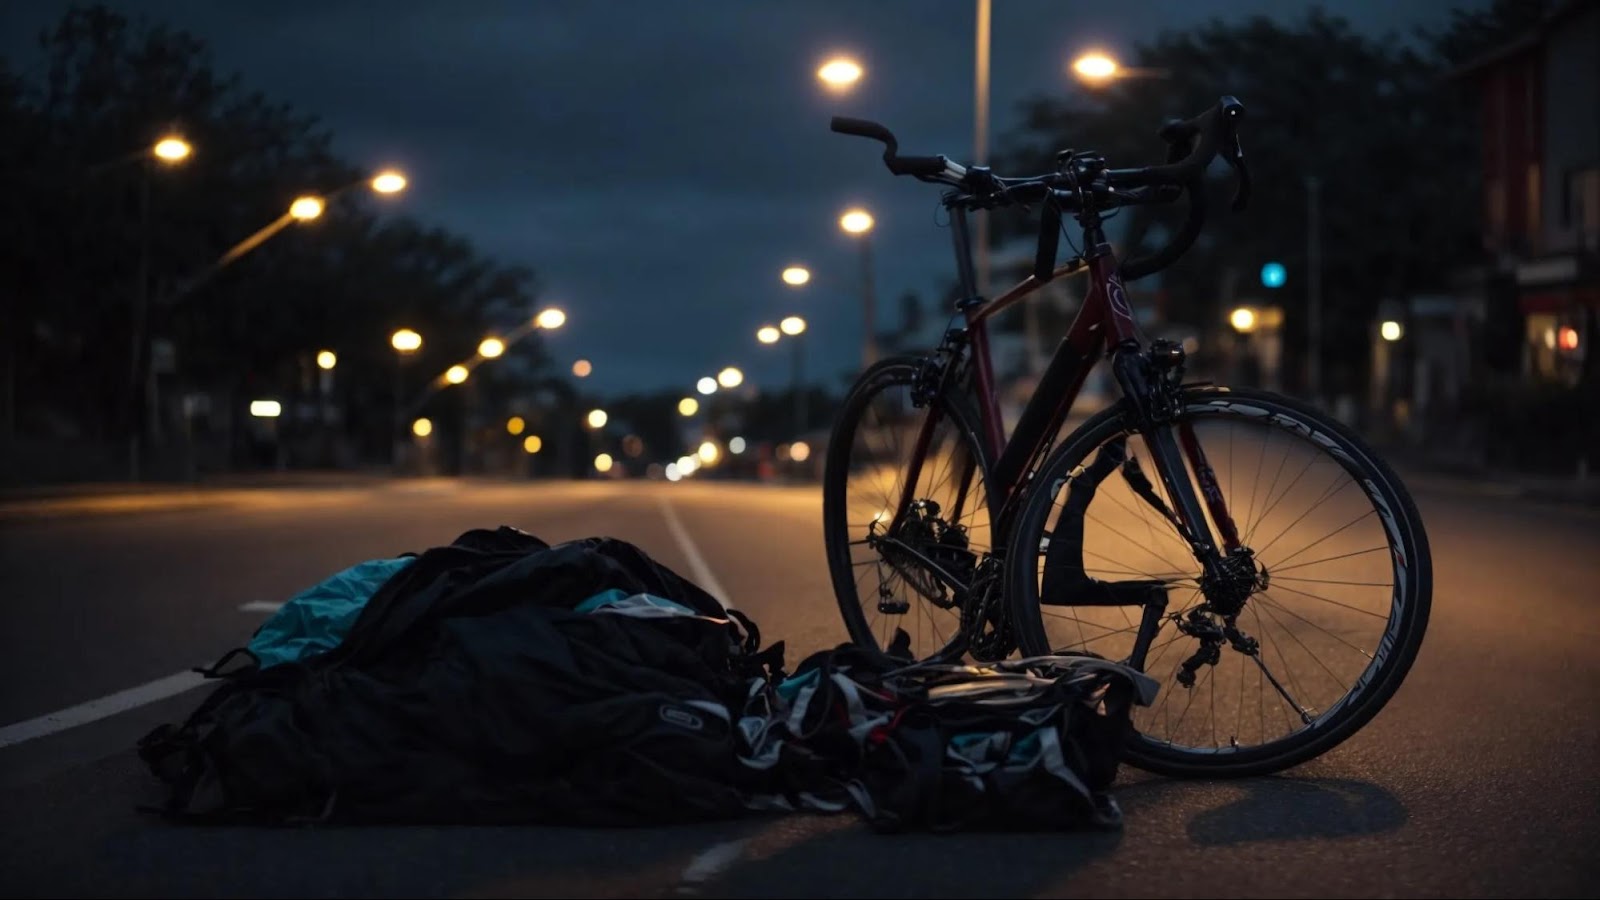 a cyclist lies beside a crumpled bicycle on an empty road at dusk, with blurred city lights in the background.